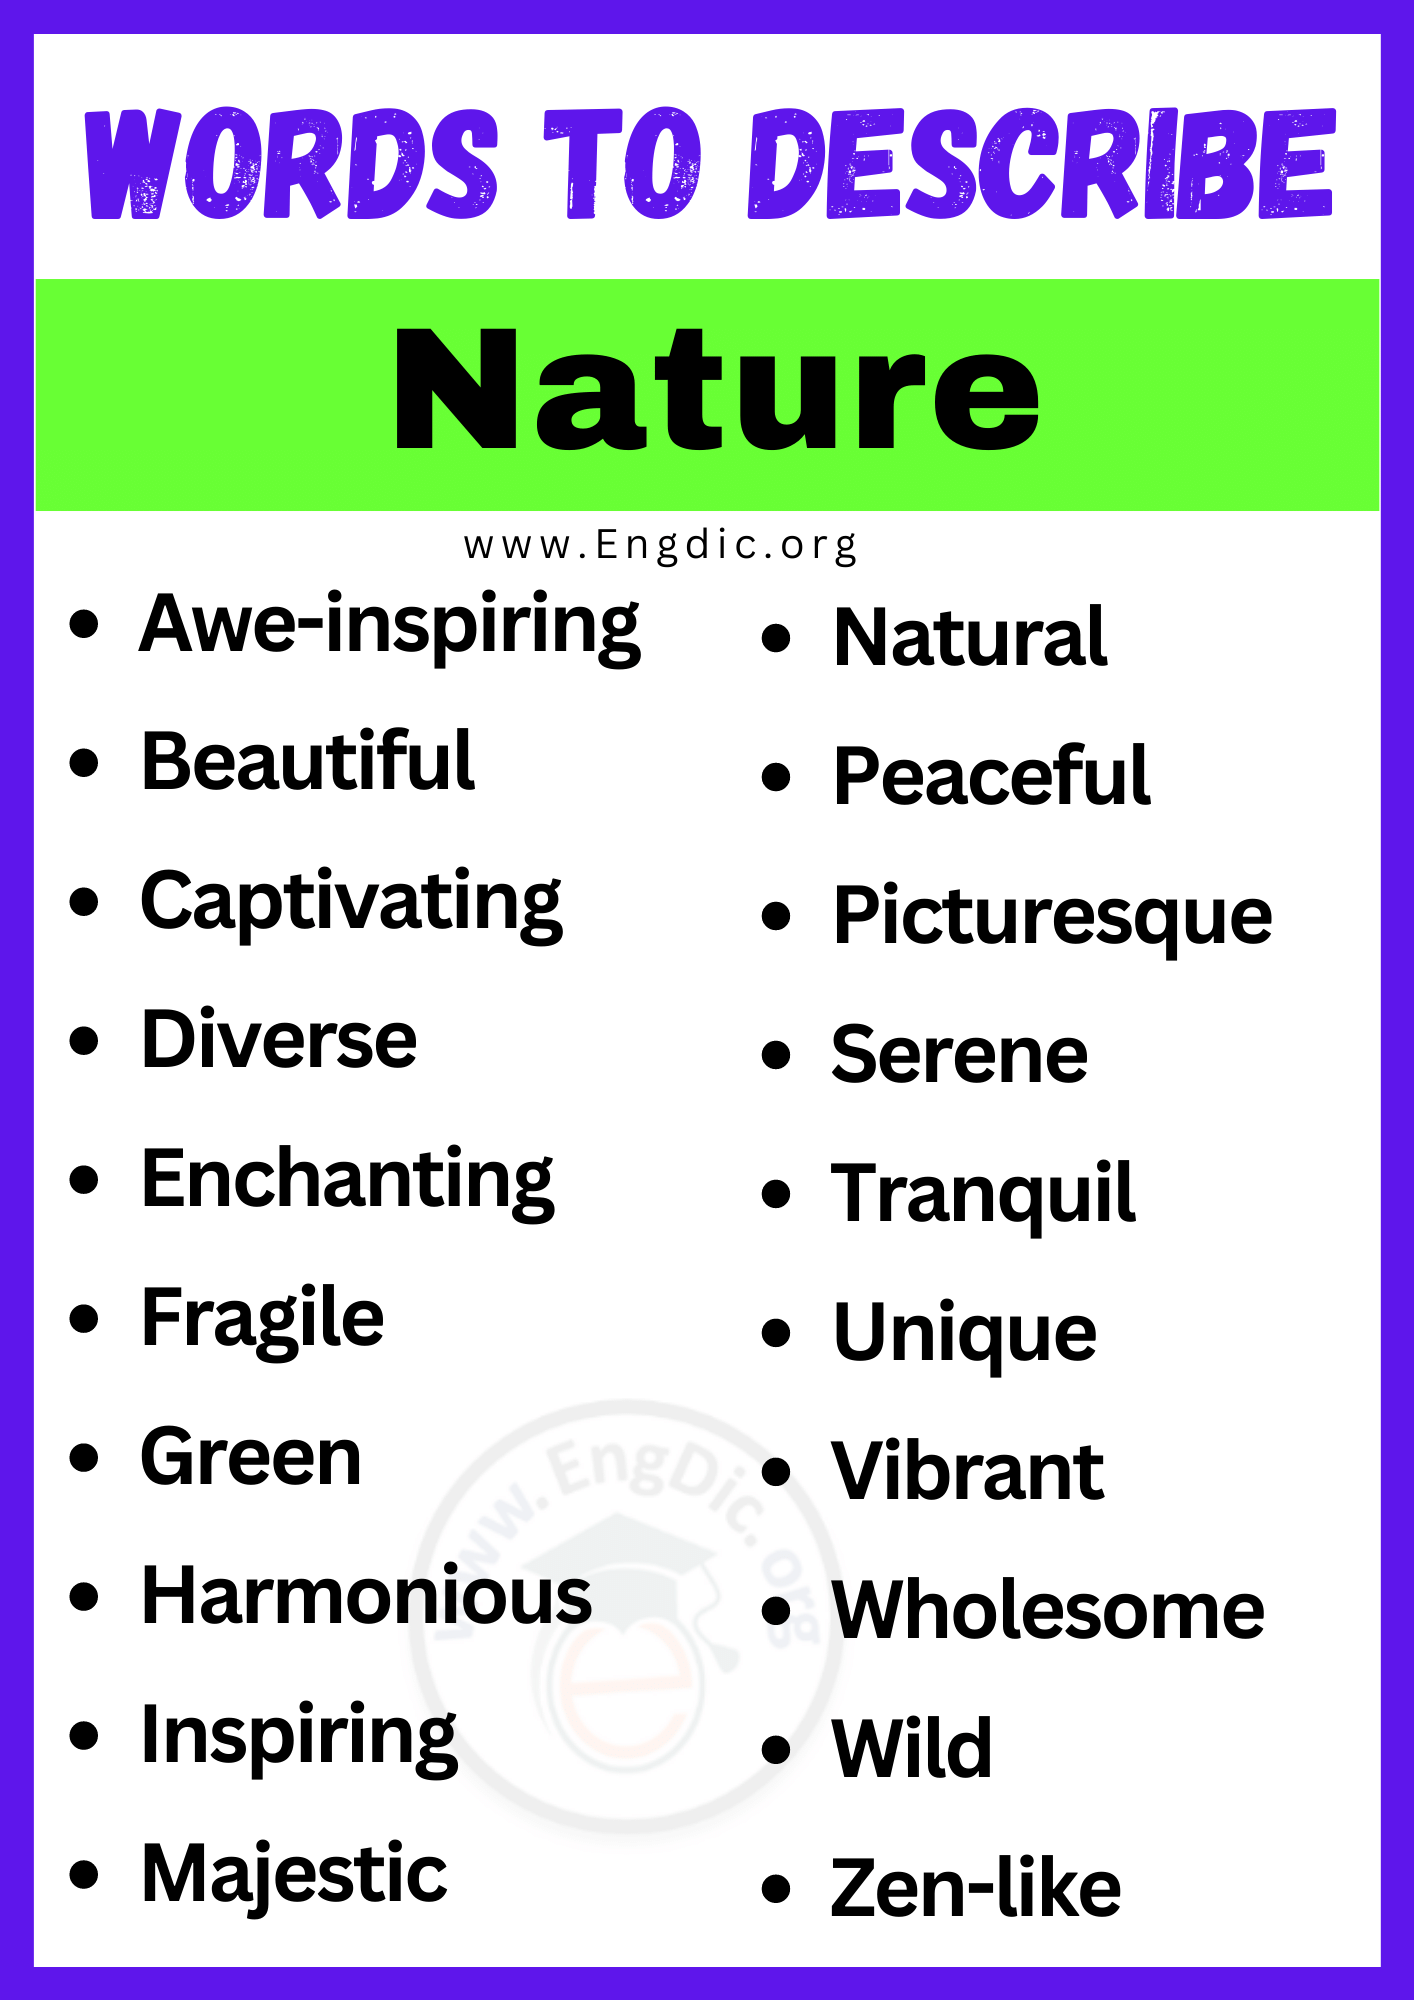 Words to Describe Nature